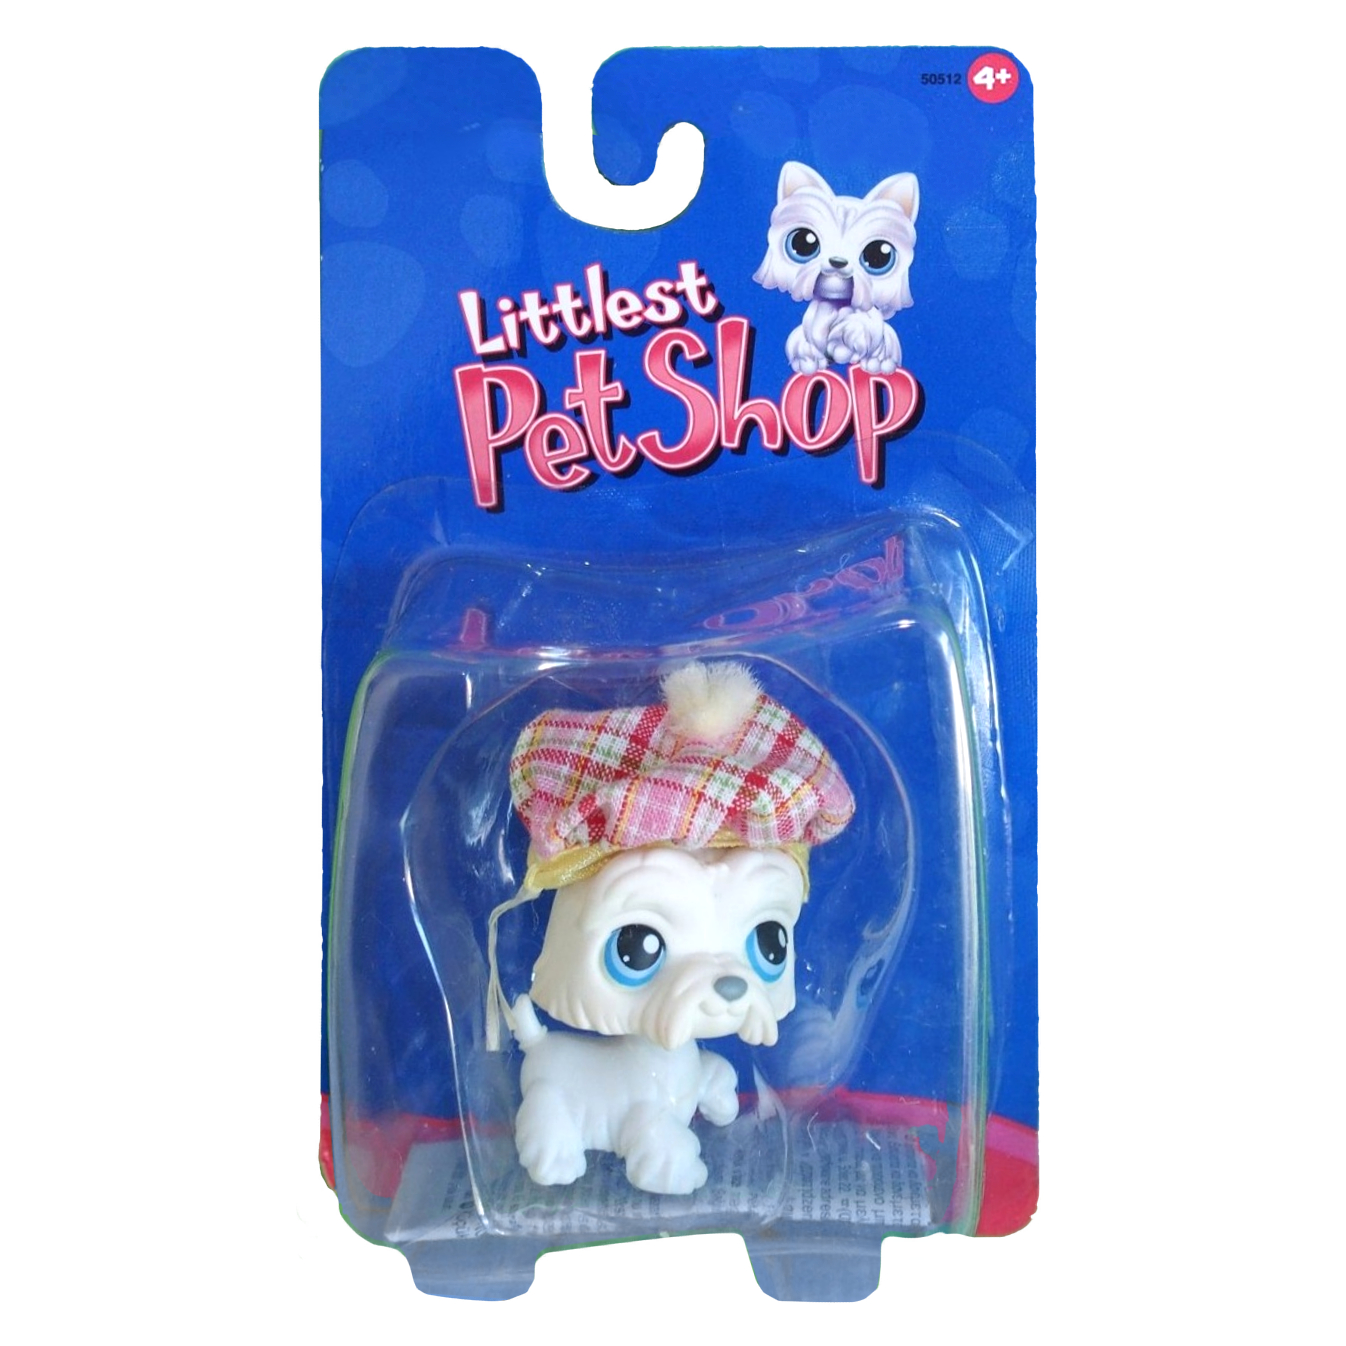 https://static.wikia.nocookie.net/the-littlest-pet-shop-wikia/images/f/f1/24-singles.jpg/revision/latest?cb=20230713210237